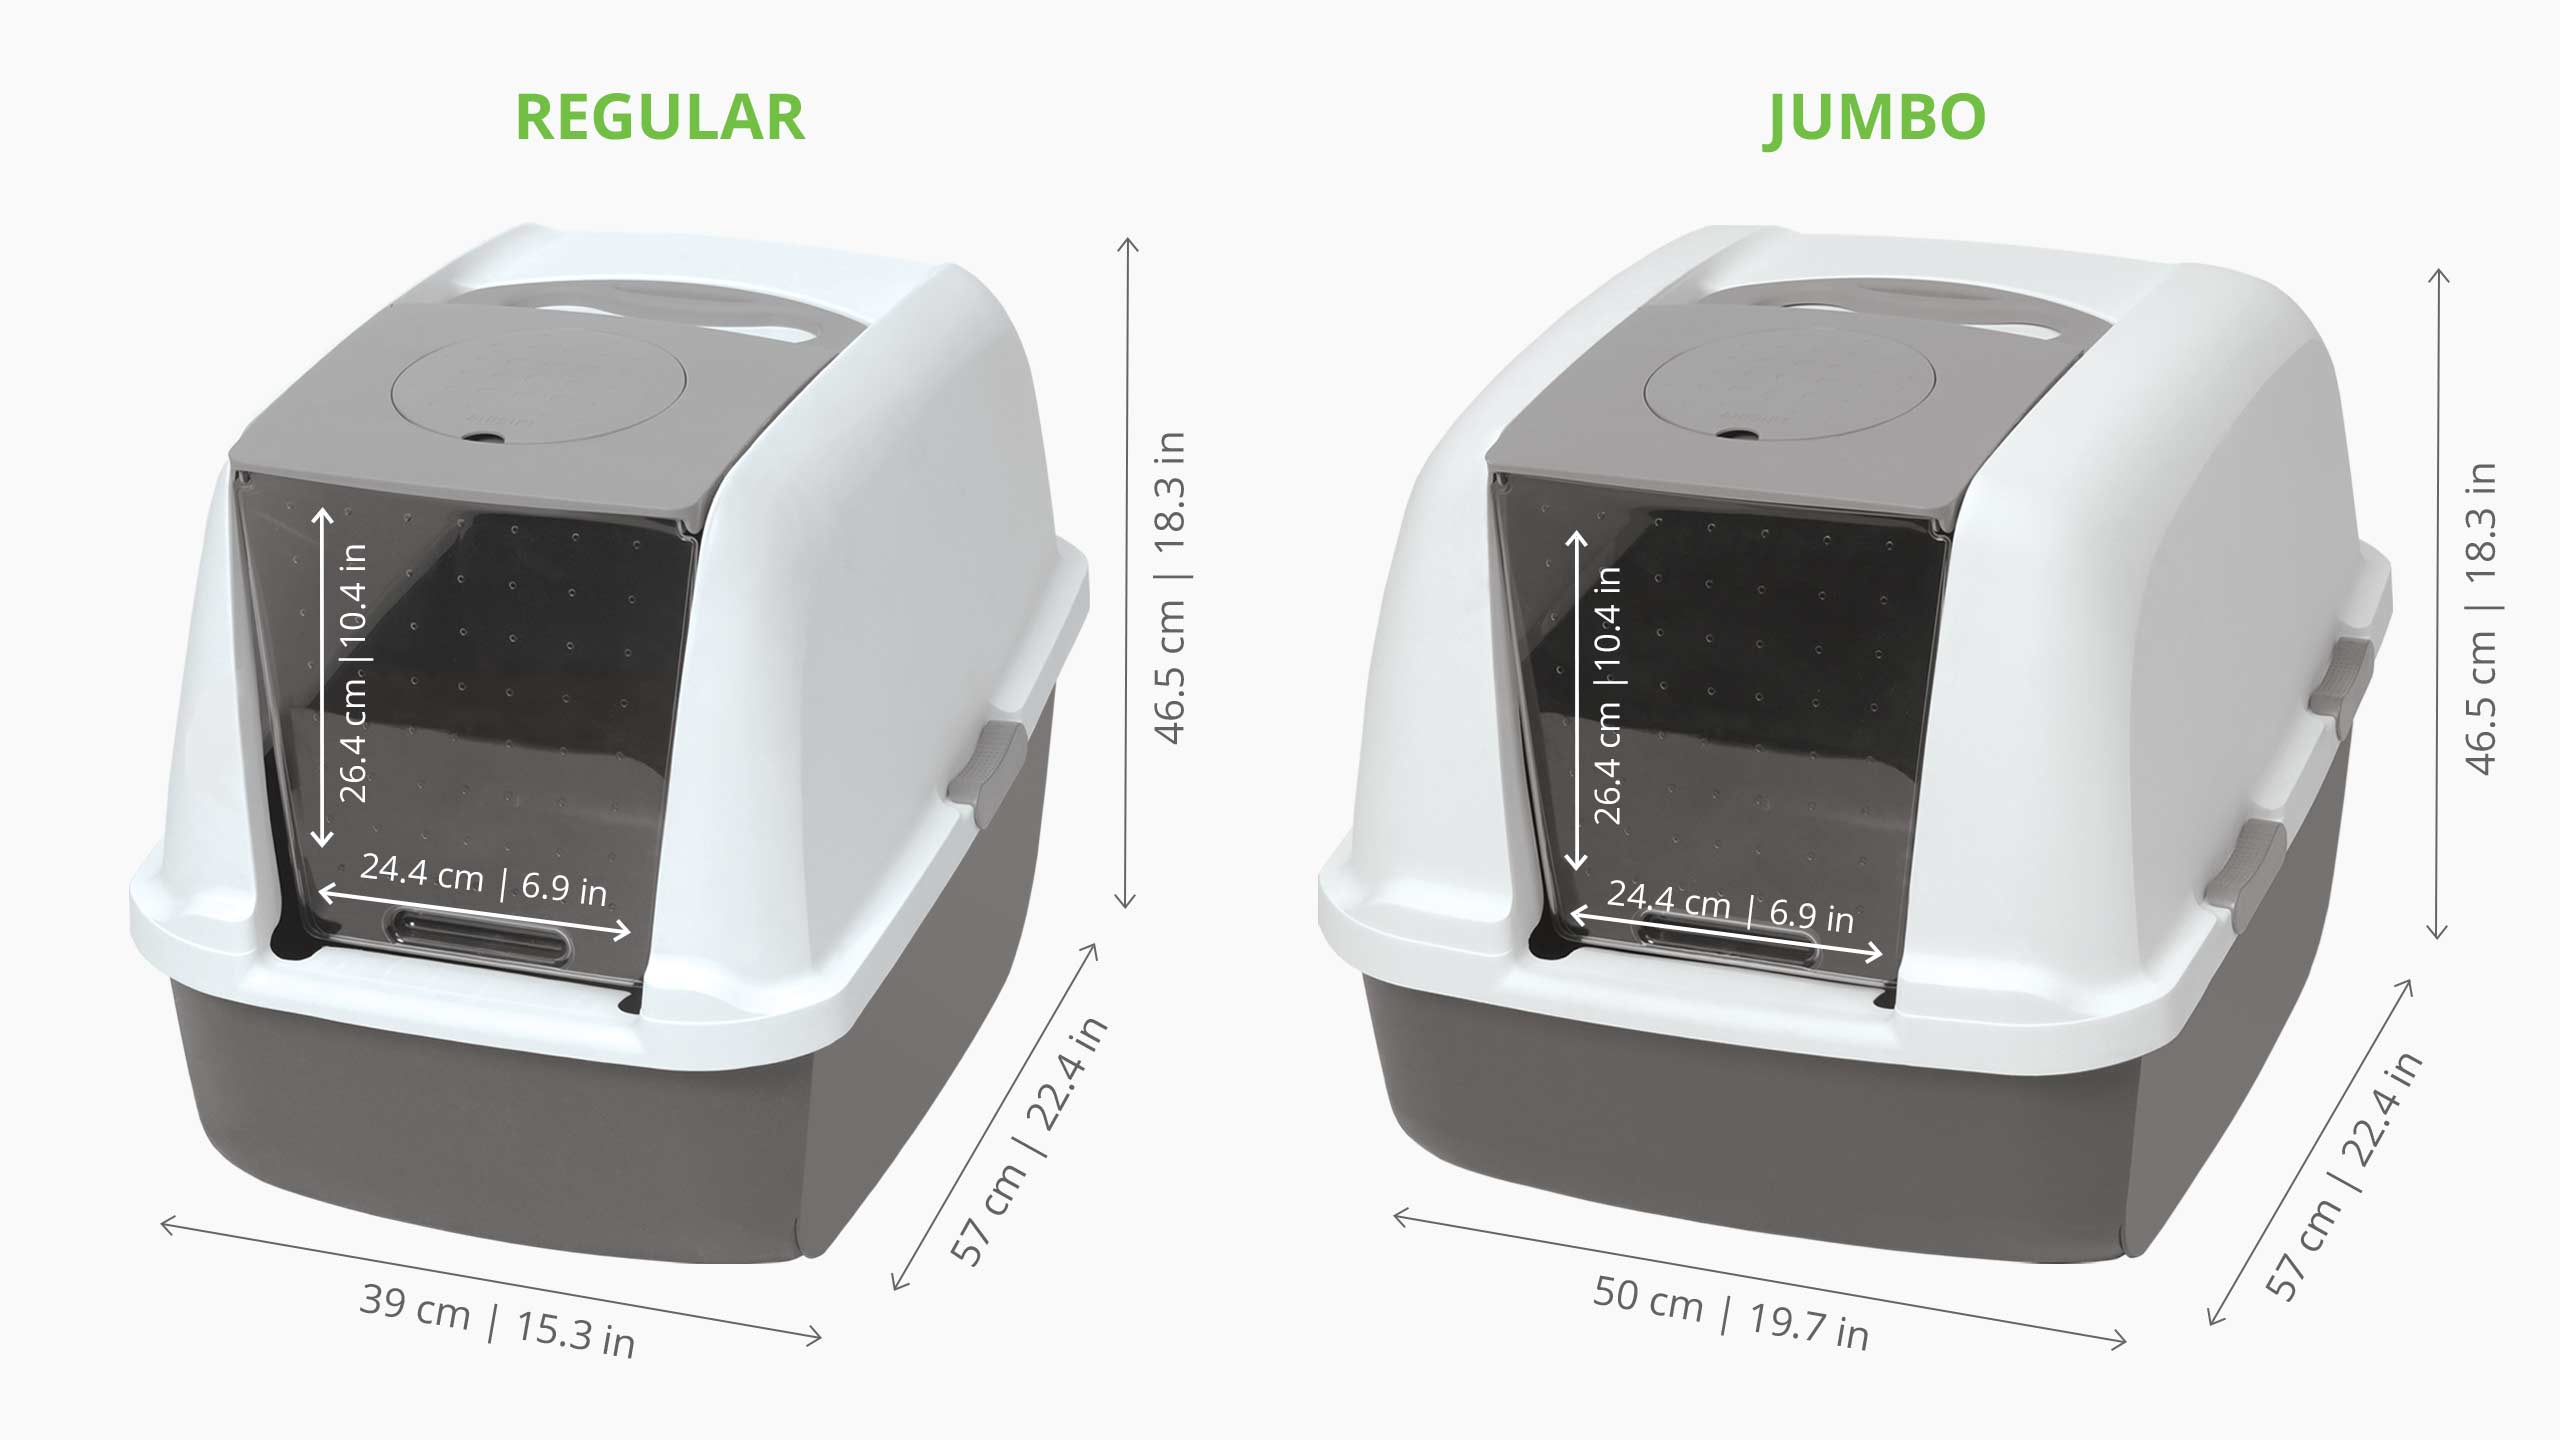 Litter Boxes with Airsift filter available in regular and jumbo size